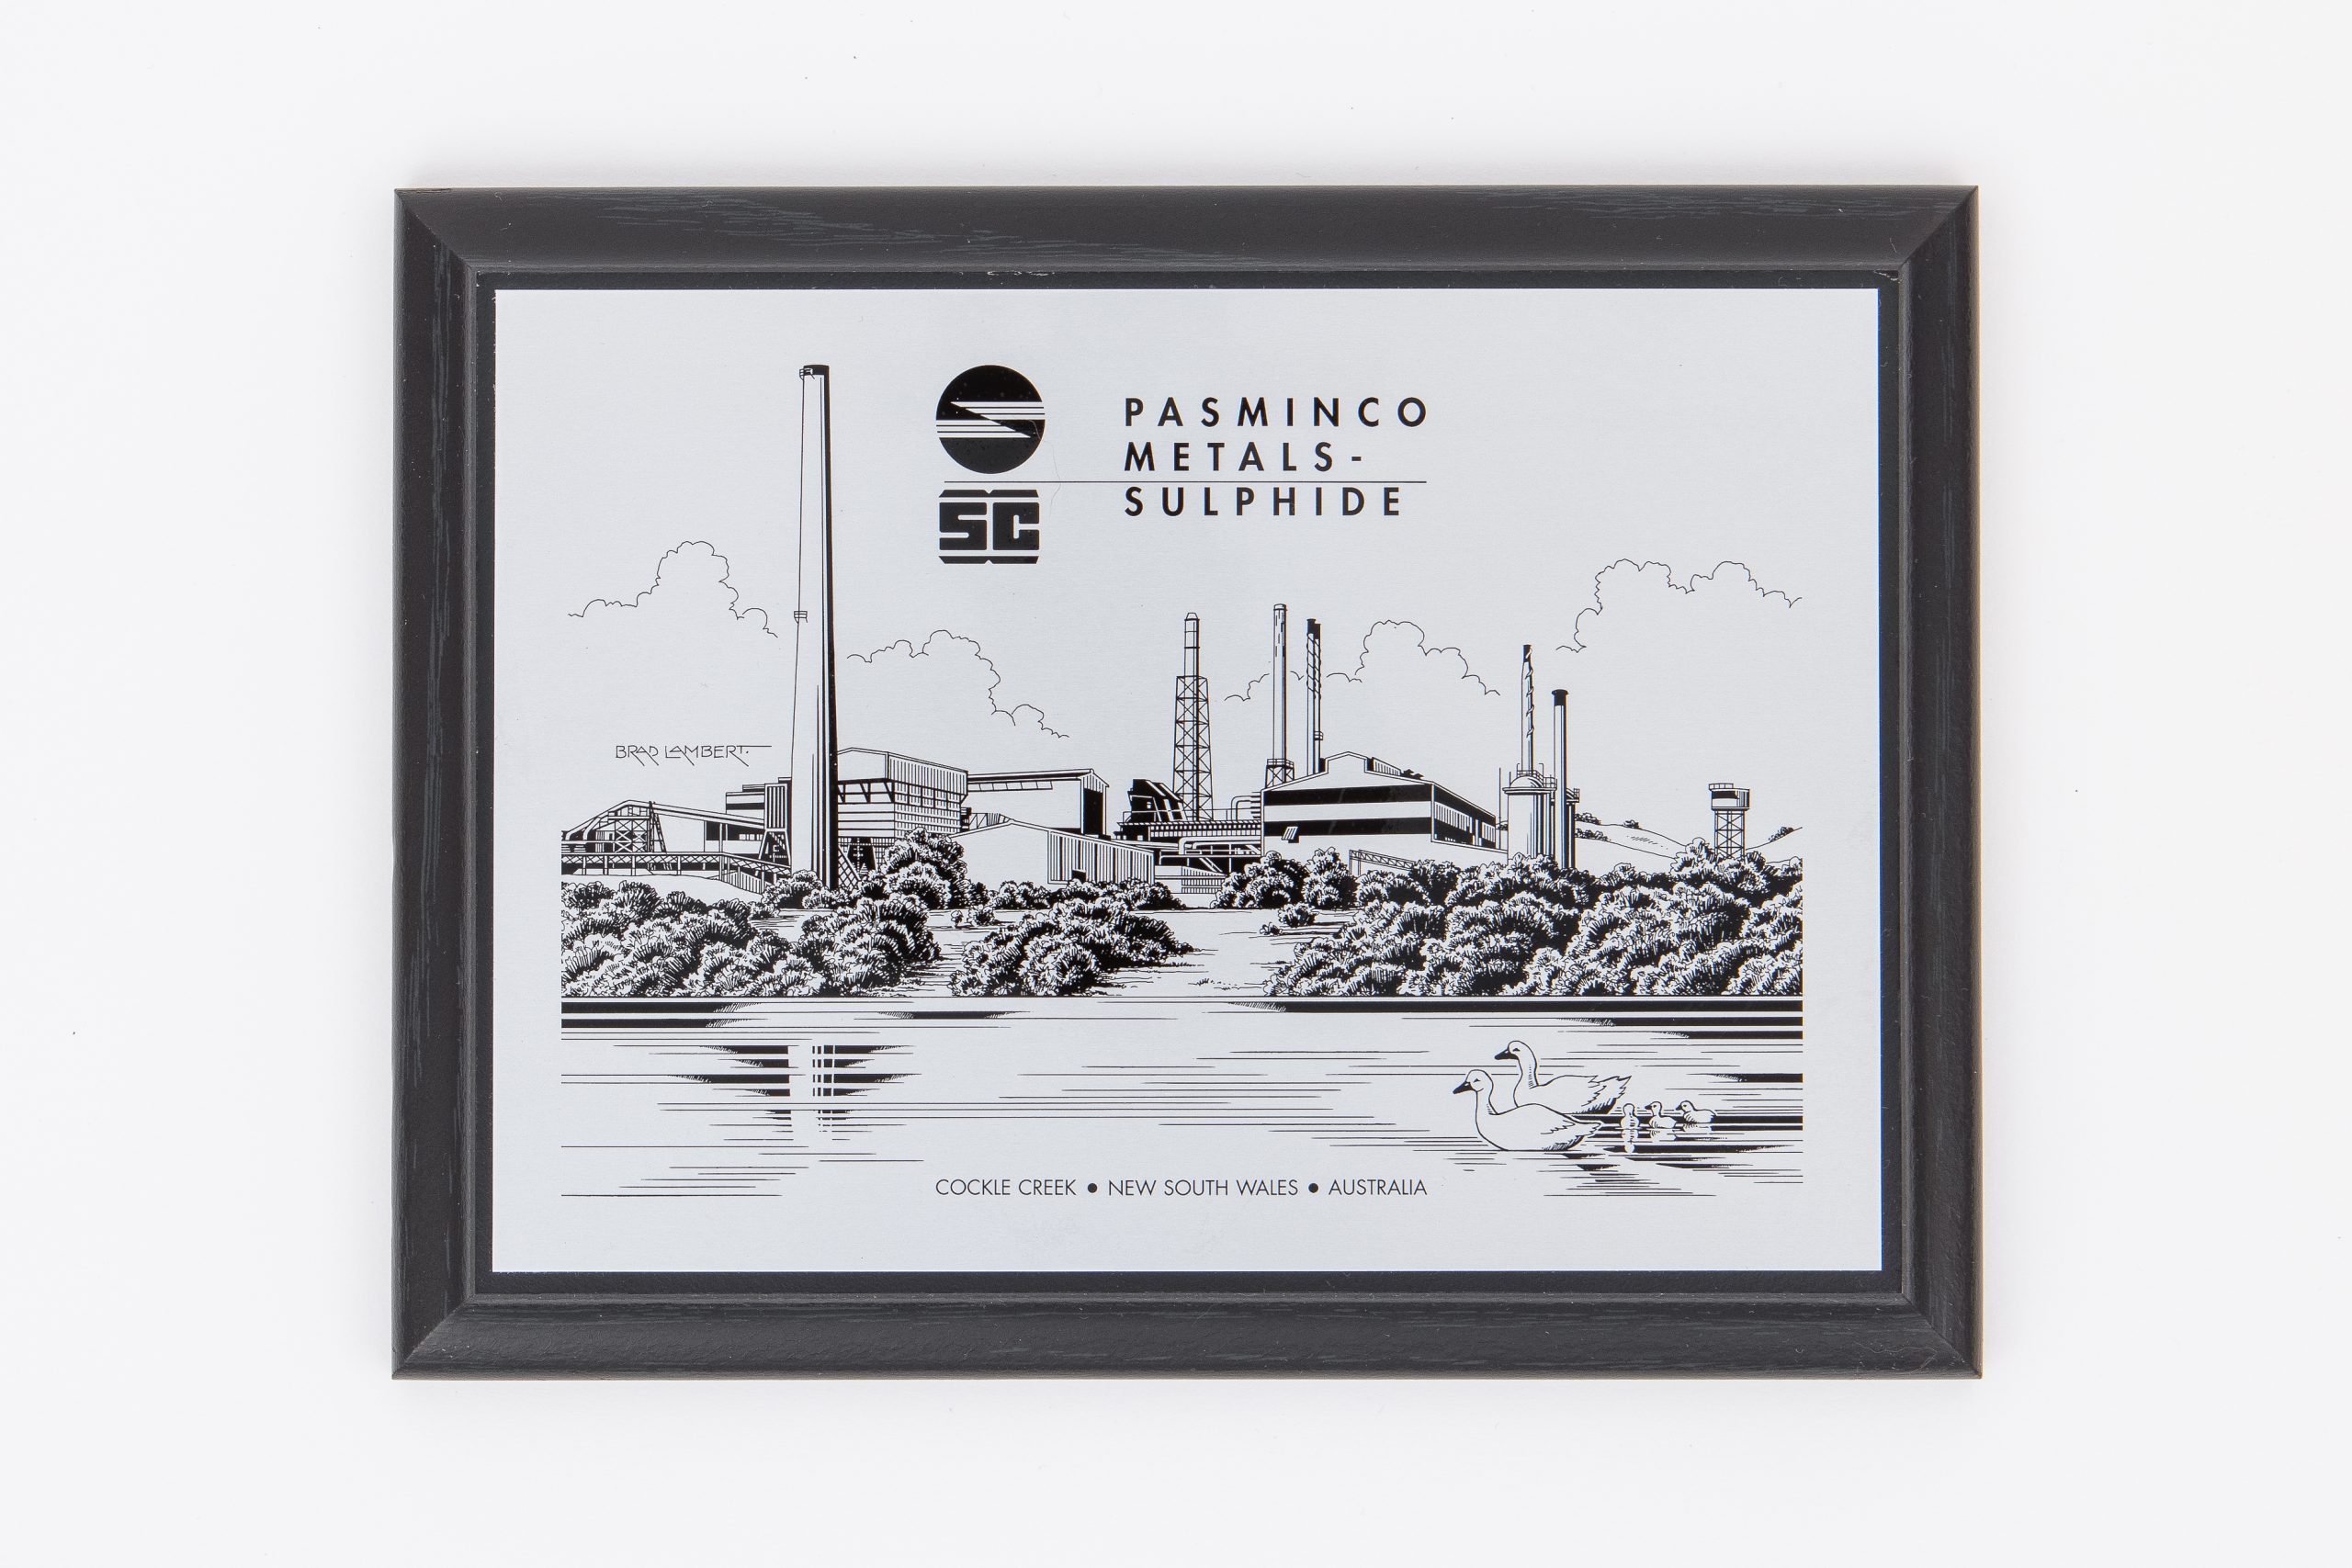 MDF plaque with black frame. It depicts a smelter beneath a relaxed, cloudy sky, behind a body of water where a family of ducks swim.